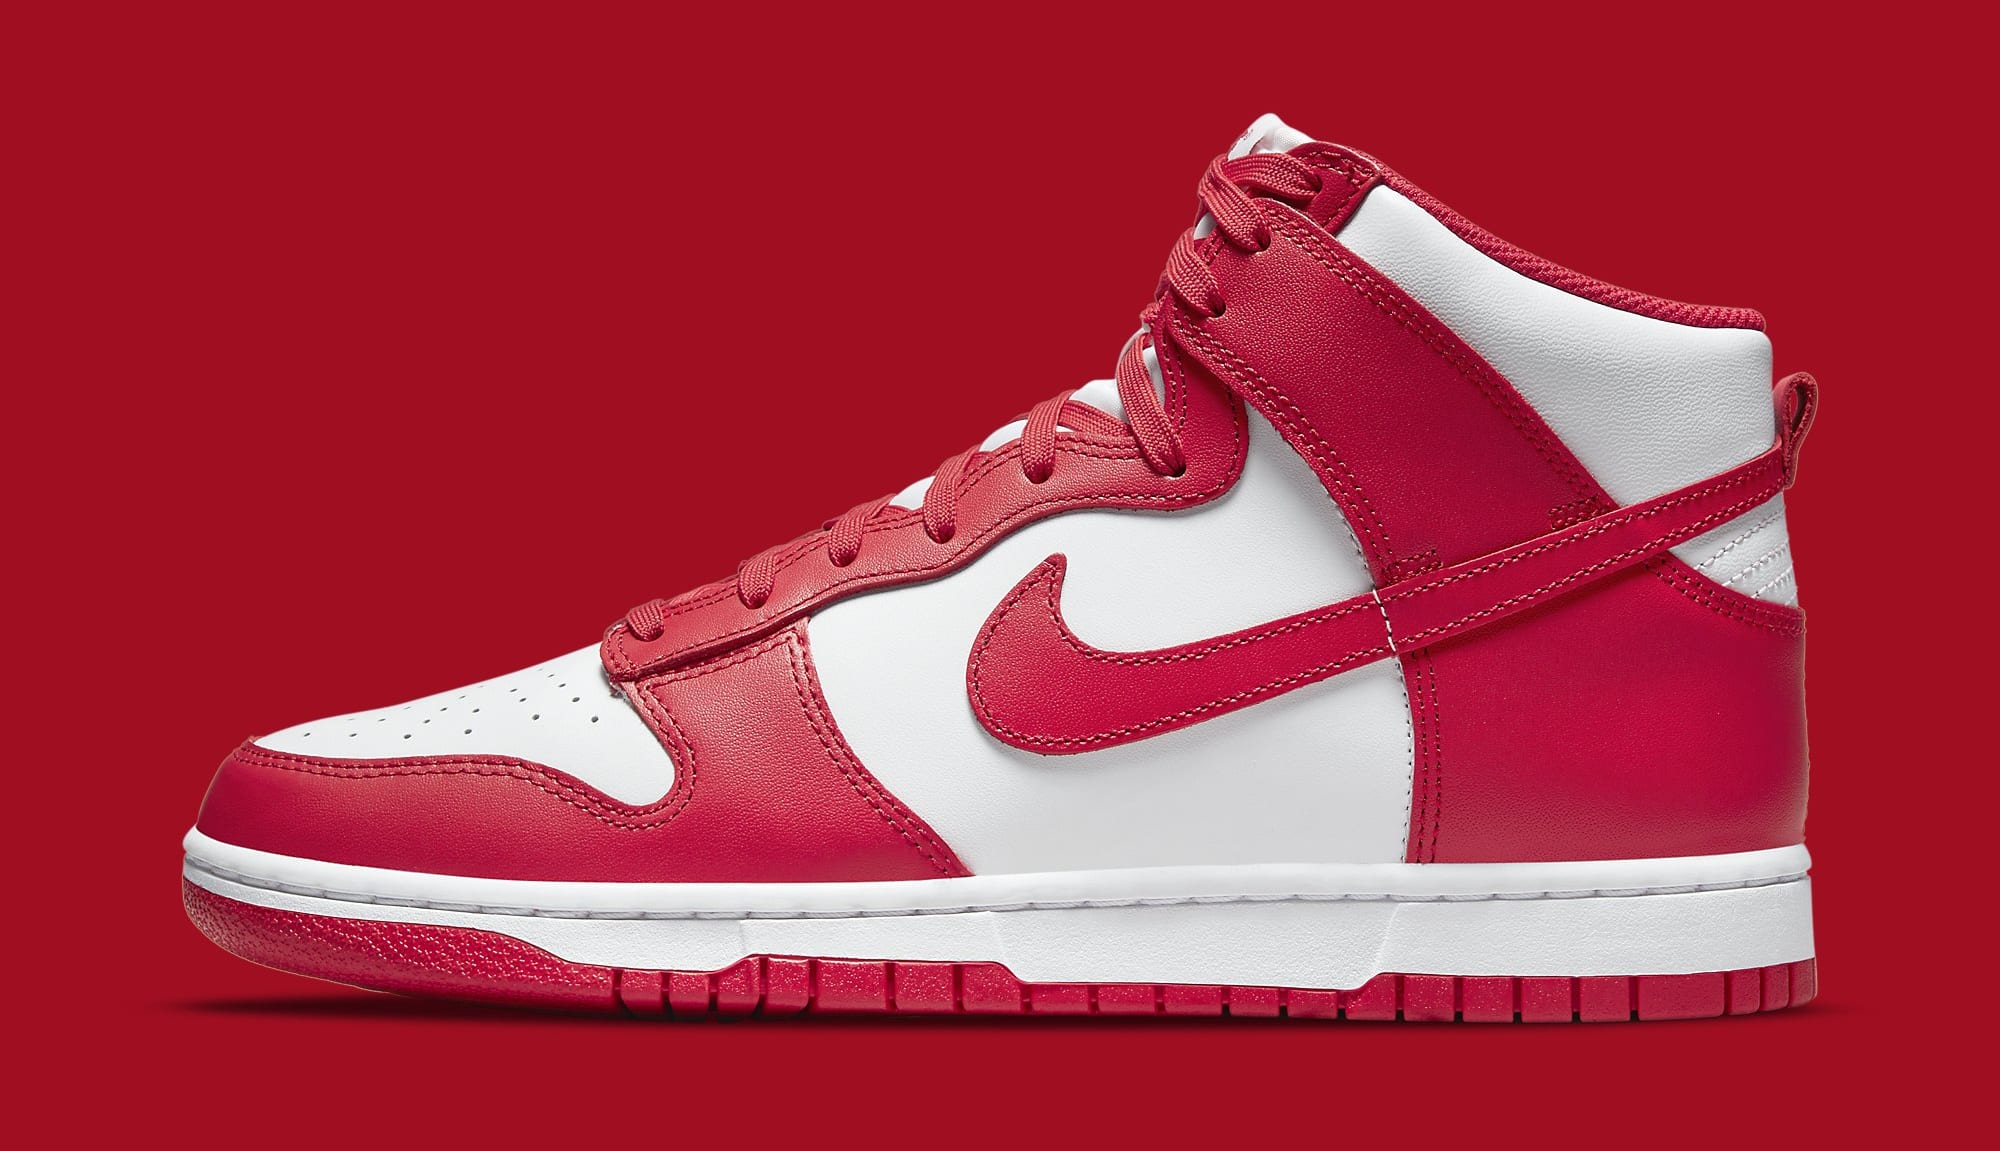 Championship Red' Nike Dunk Highs Get an Official Release Date ...